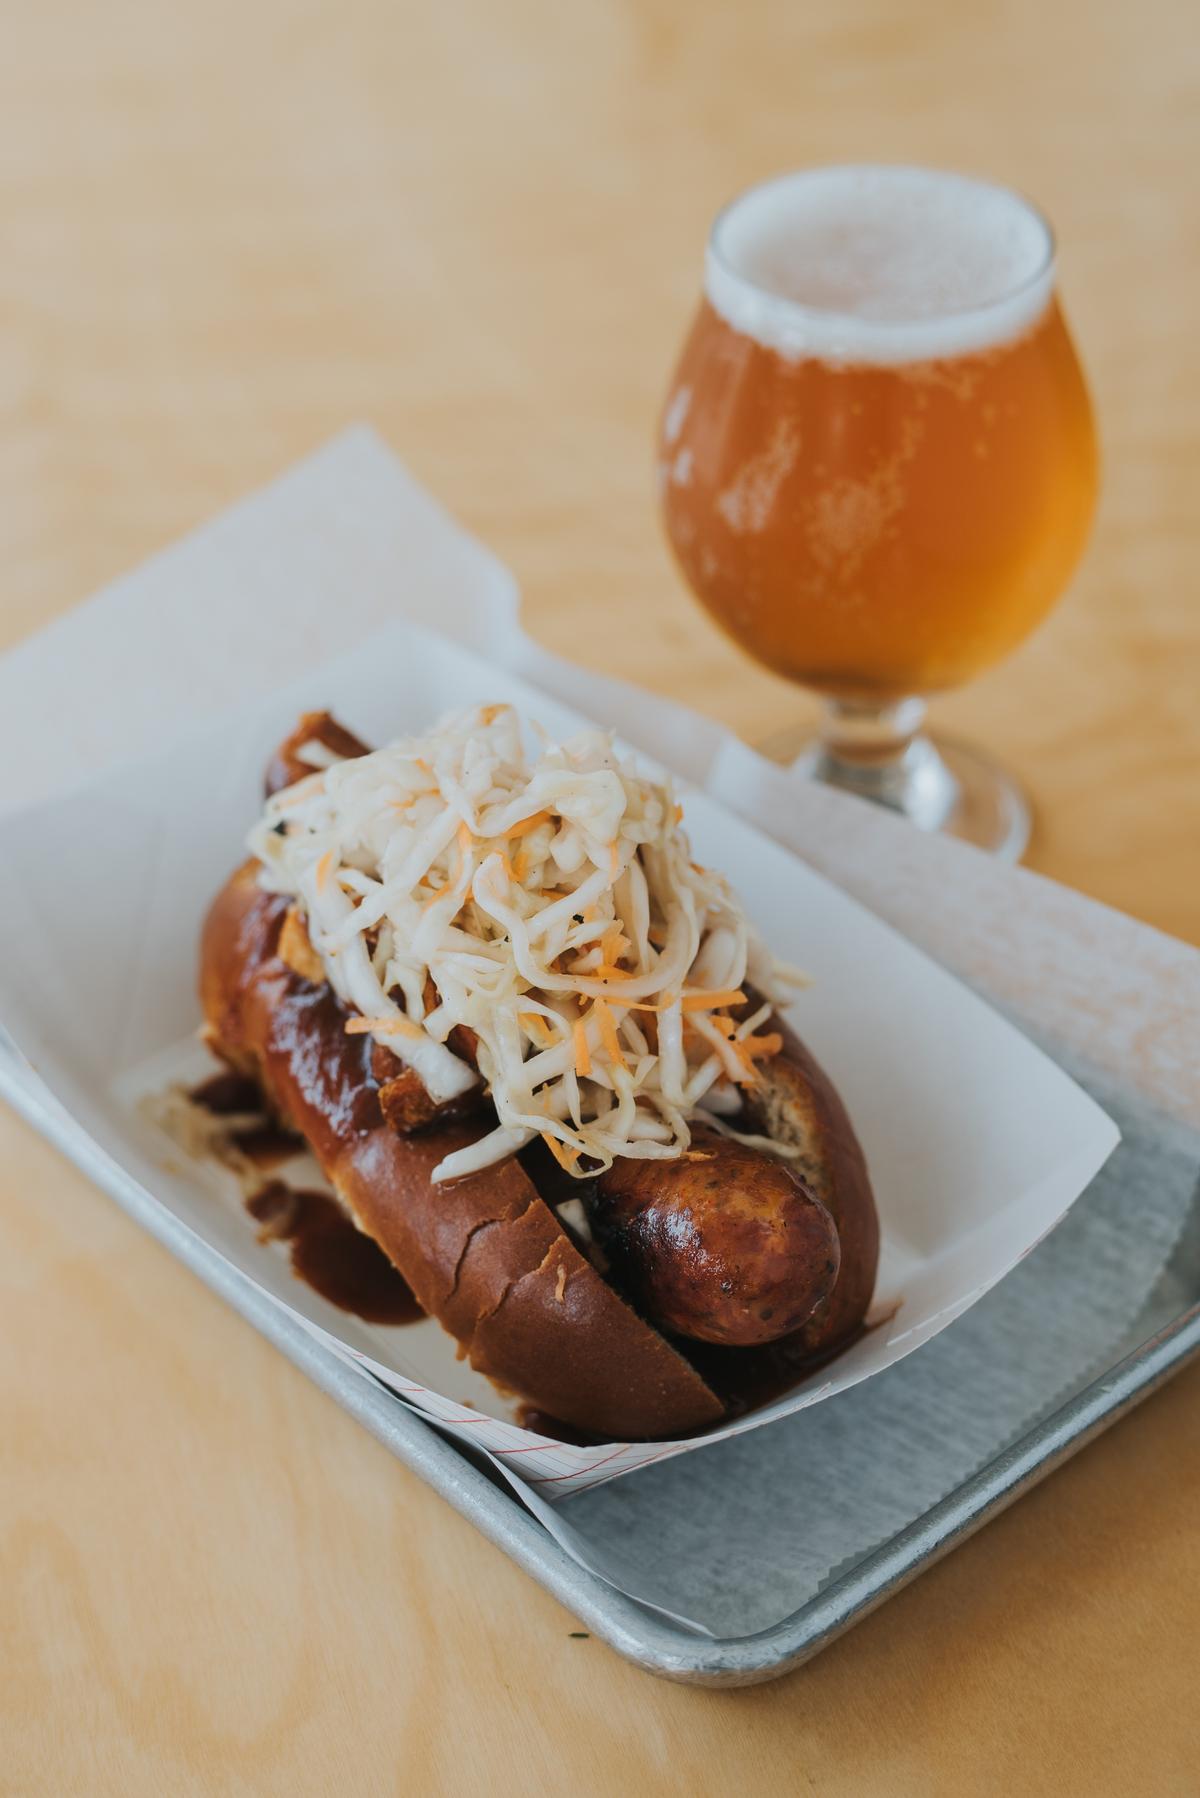 This sausage in a bun covered with coleslaw, French fries, and barbecue sauce should be on your shortlist to try on a visit to Cleveland. (Nathan Migal)